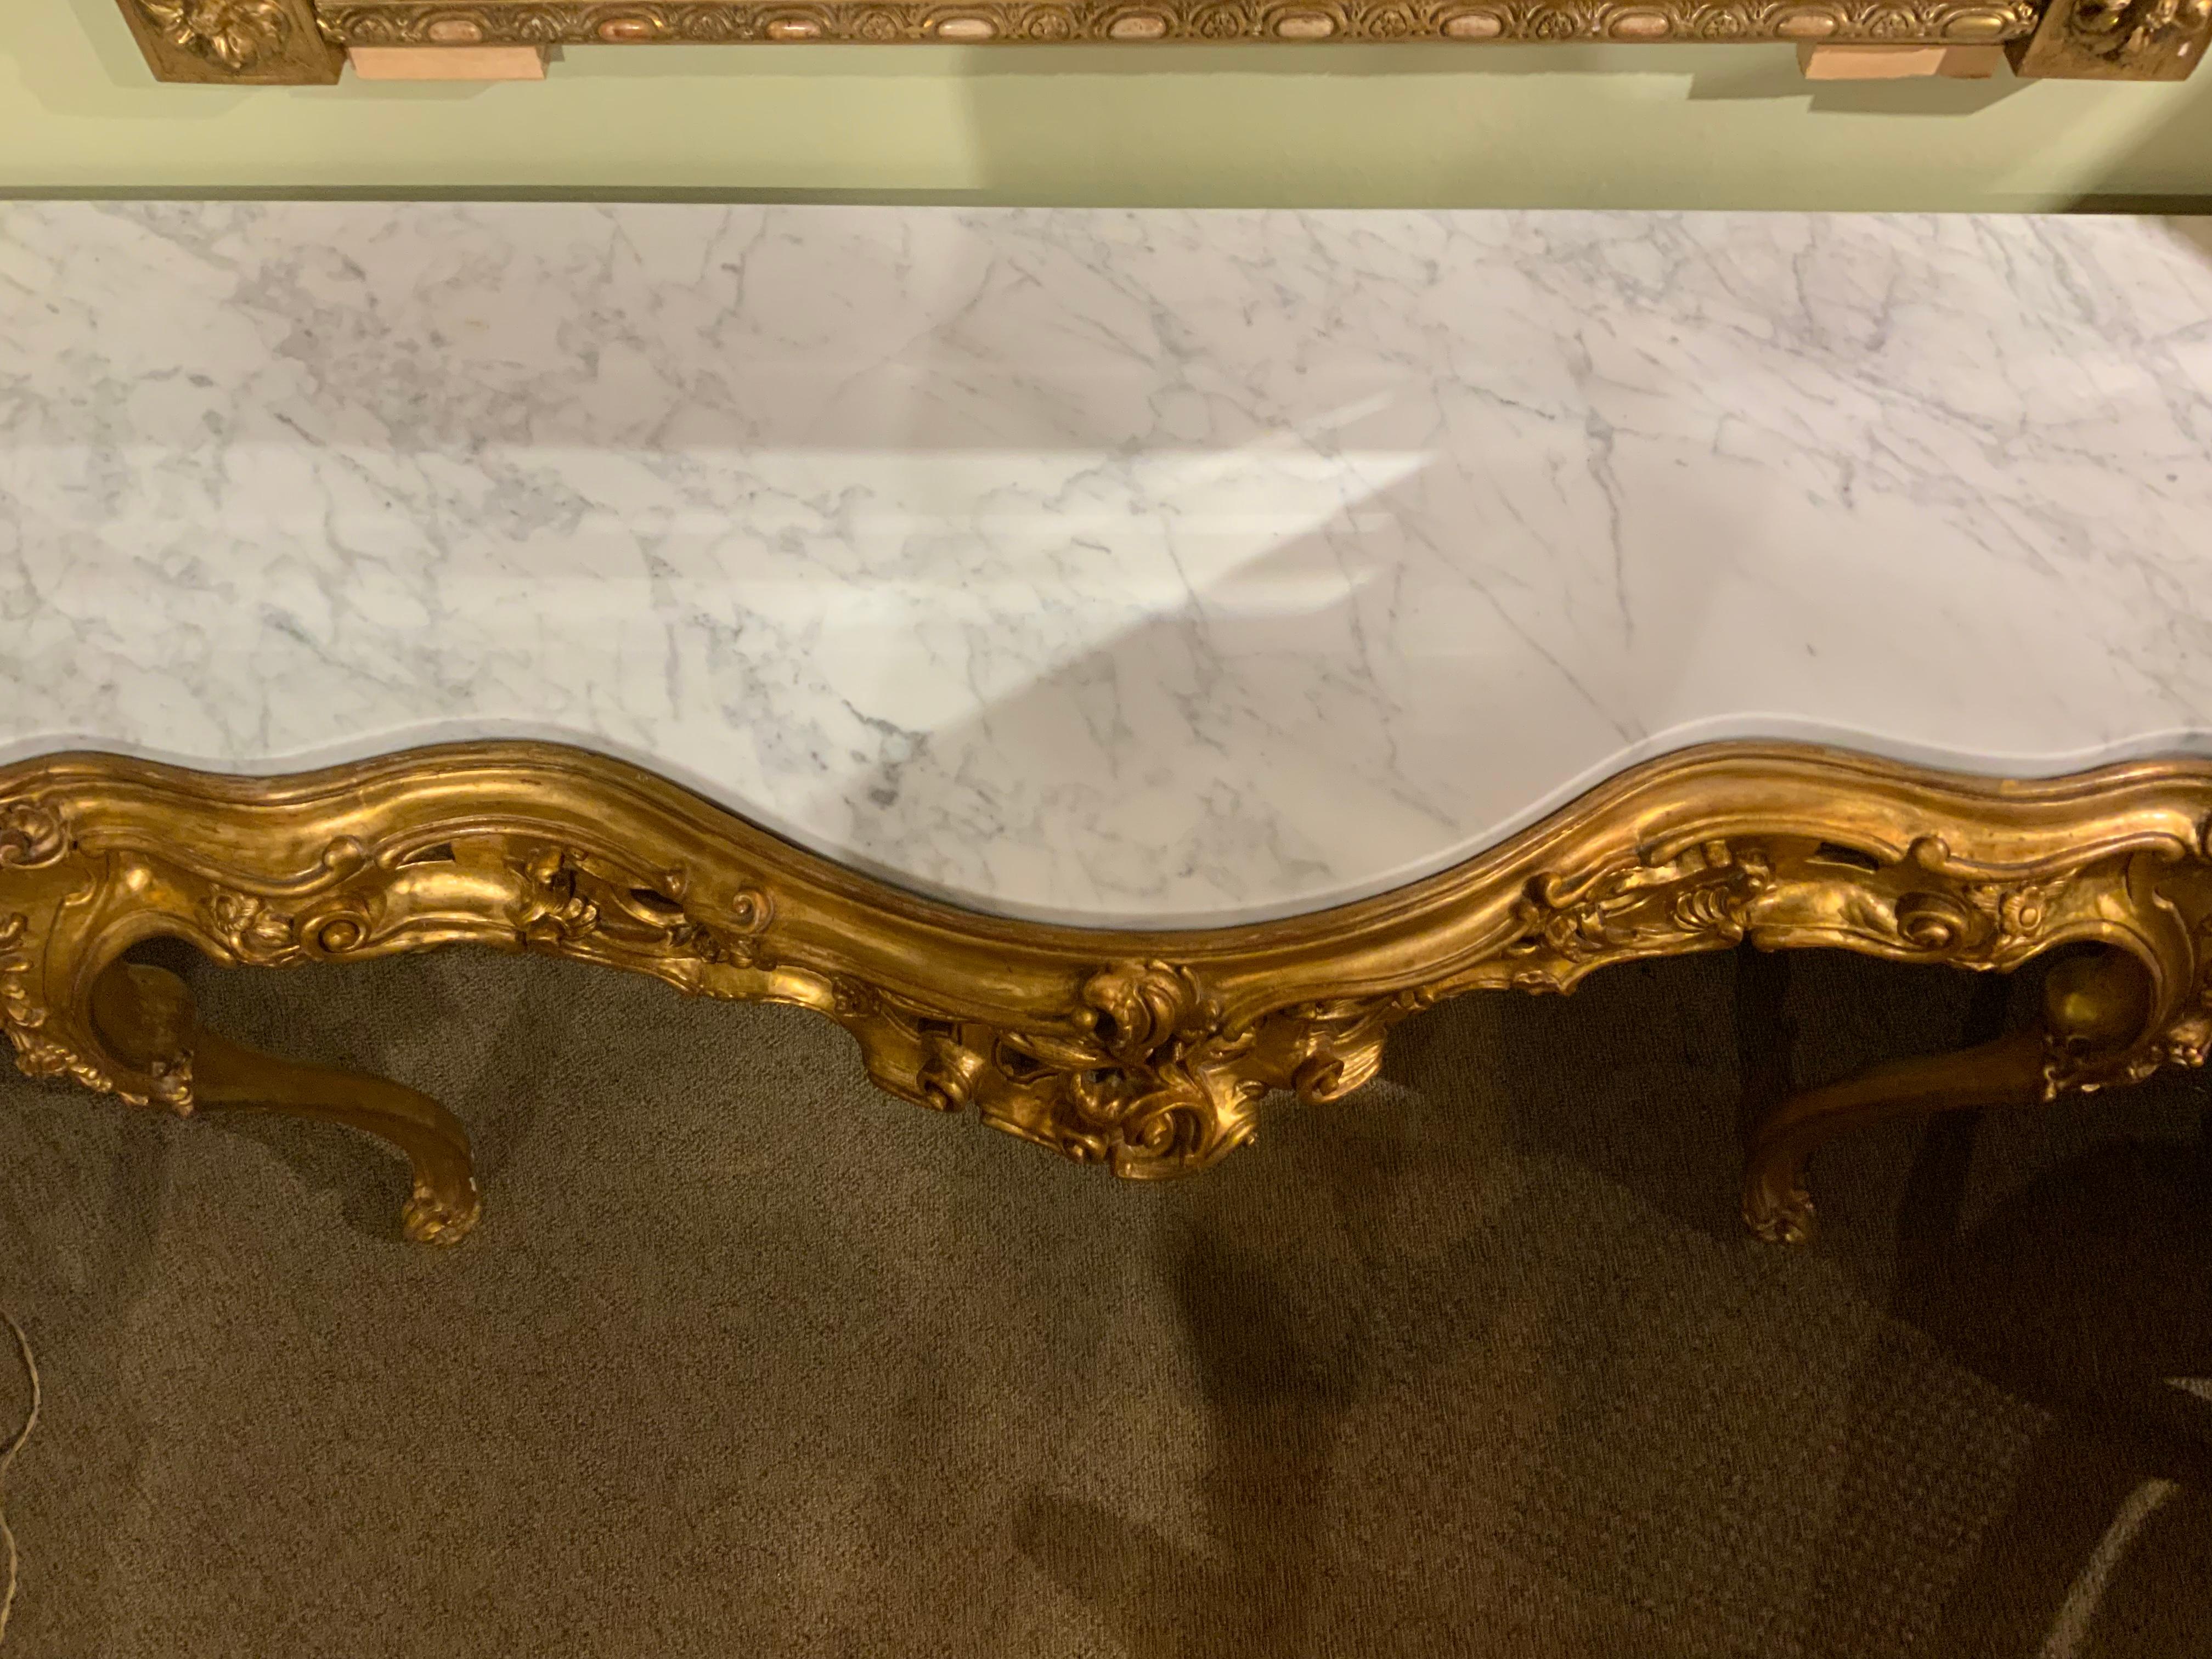 Italian Giltwood and White Marble-Top Console Table with Scrolls /Floral Motif In Good Condition For Sale In Houston, TX